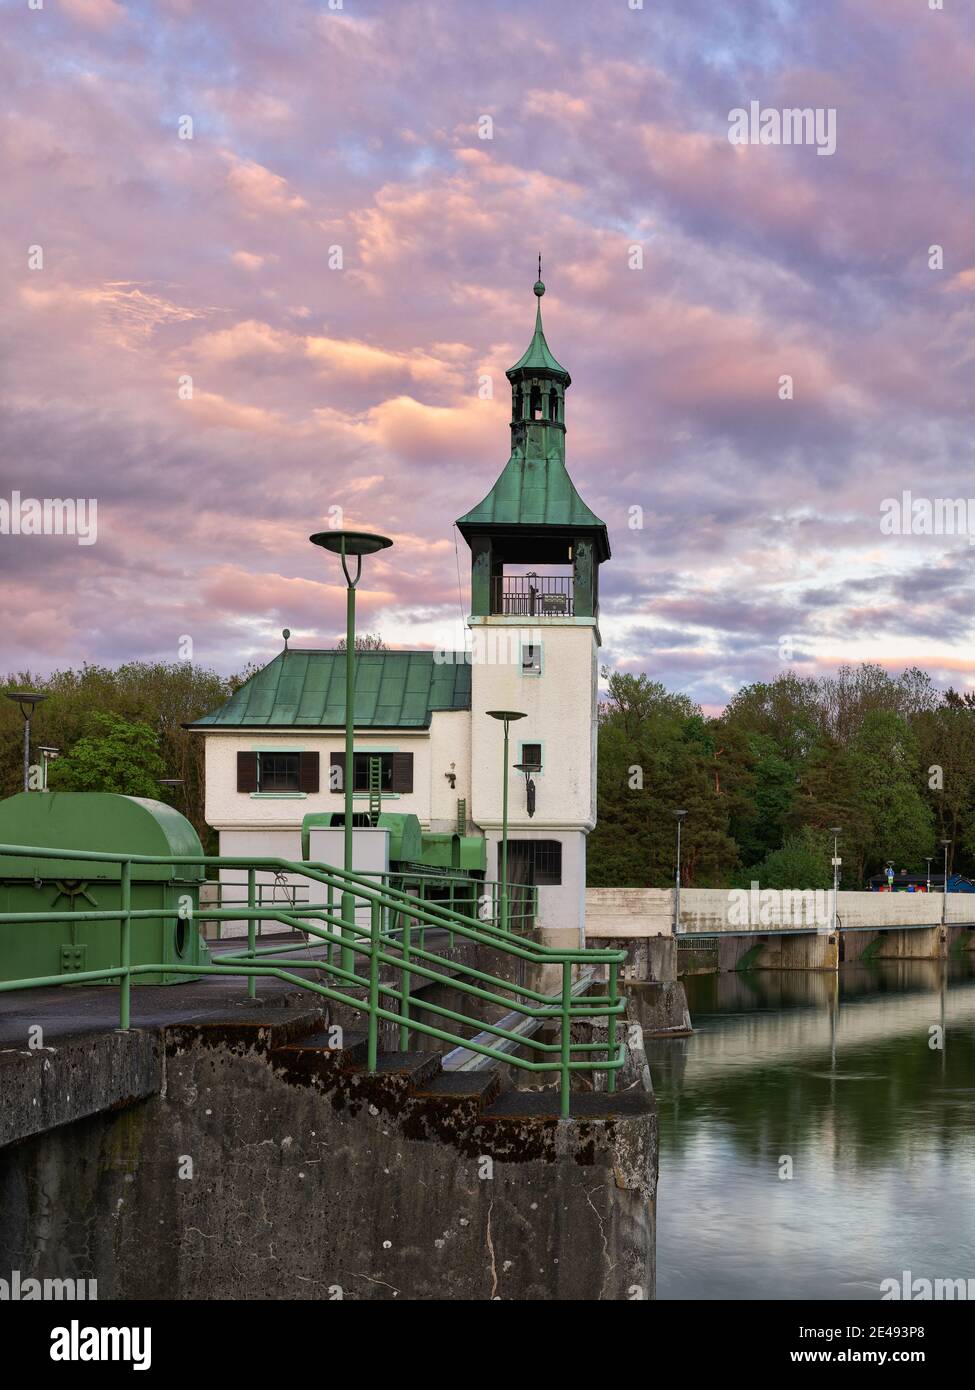 Gear house, bell tower, weir, weir, sluice, drain, canal, river, water, concrete, bank reinforcement, lanterns, trees, embankment, dusk, historical water management, place of interest, monument, listed Stock Photo